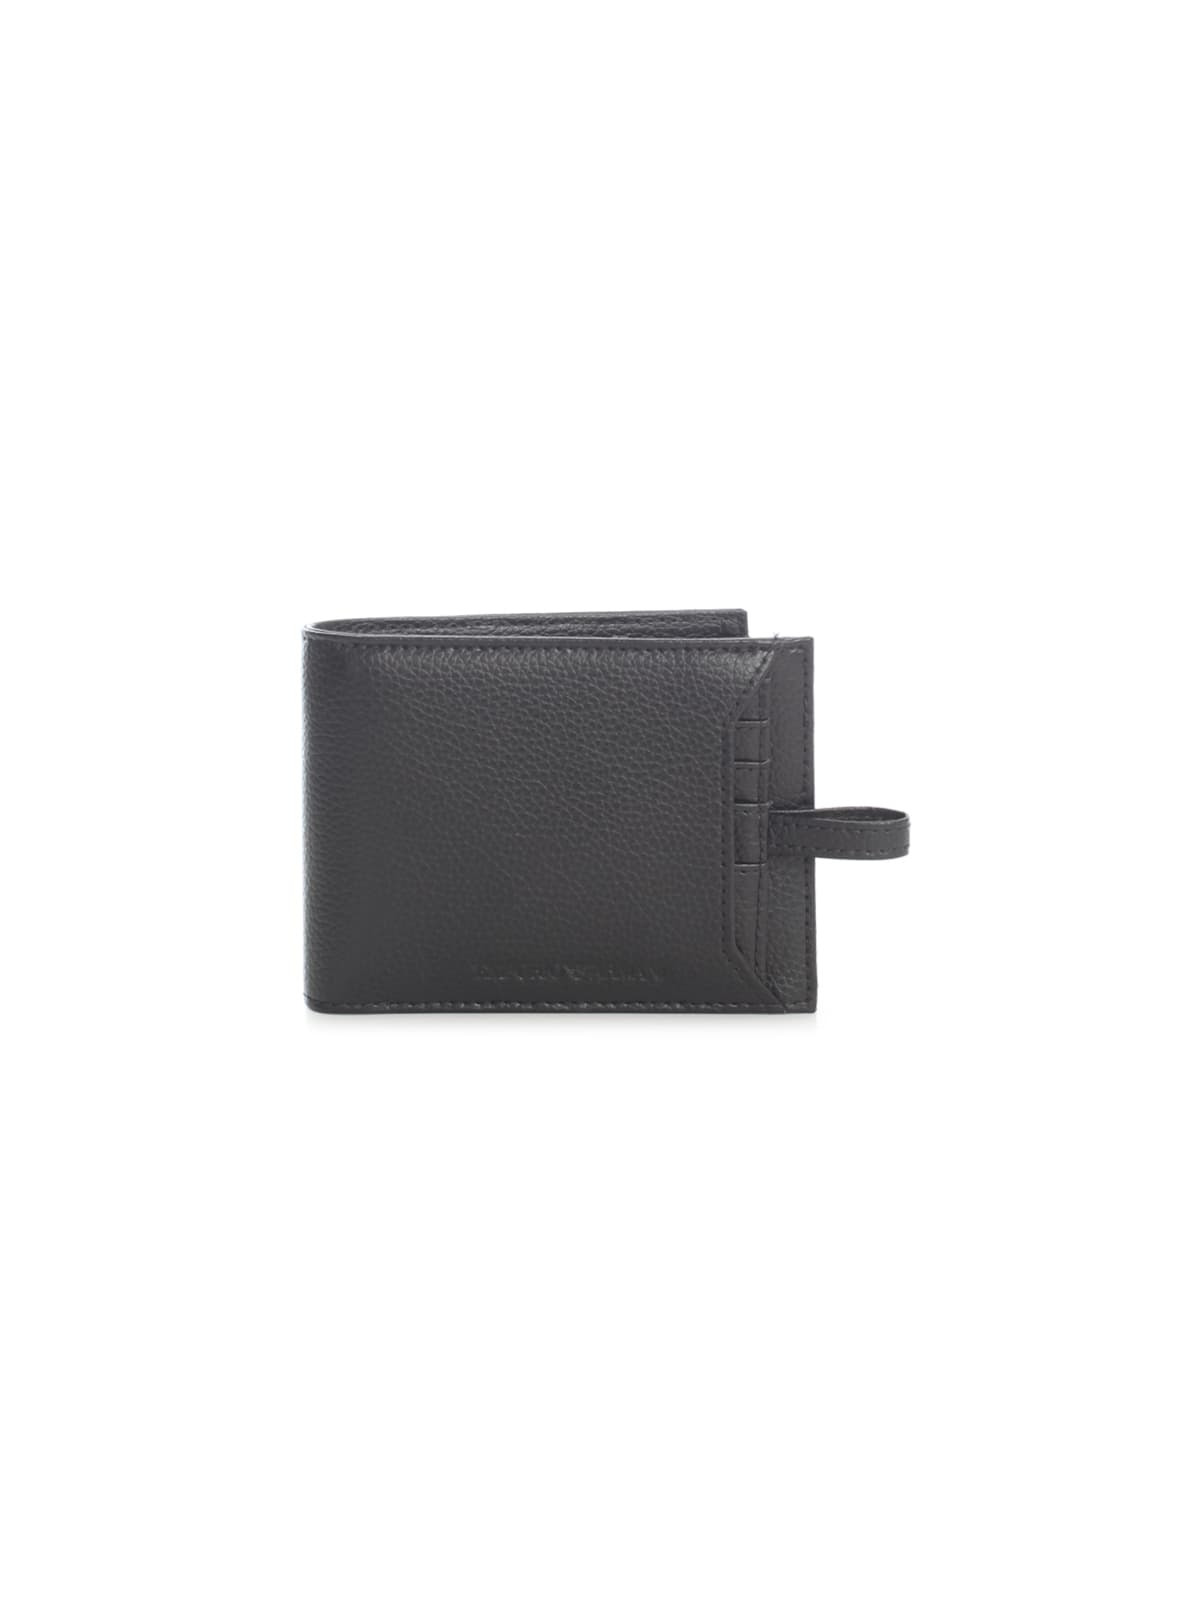 EMPORIO ARMANI LEATHER WALLET W/EXTRACTABLE CARD HOLDER,11520539